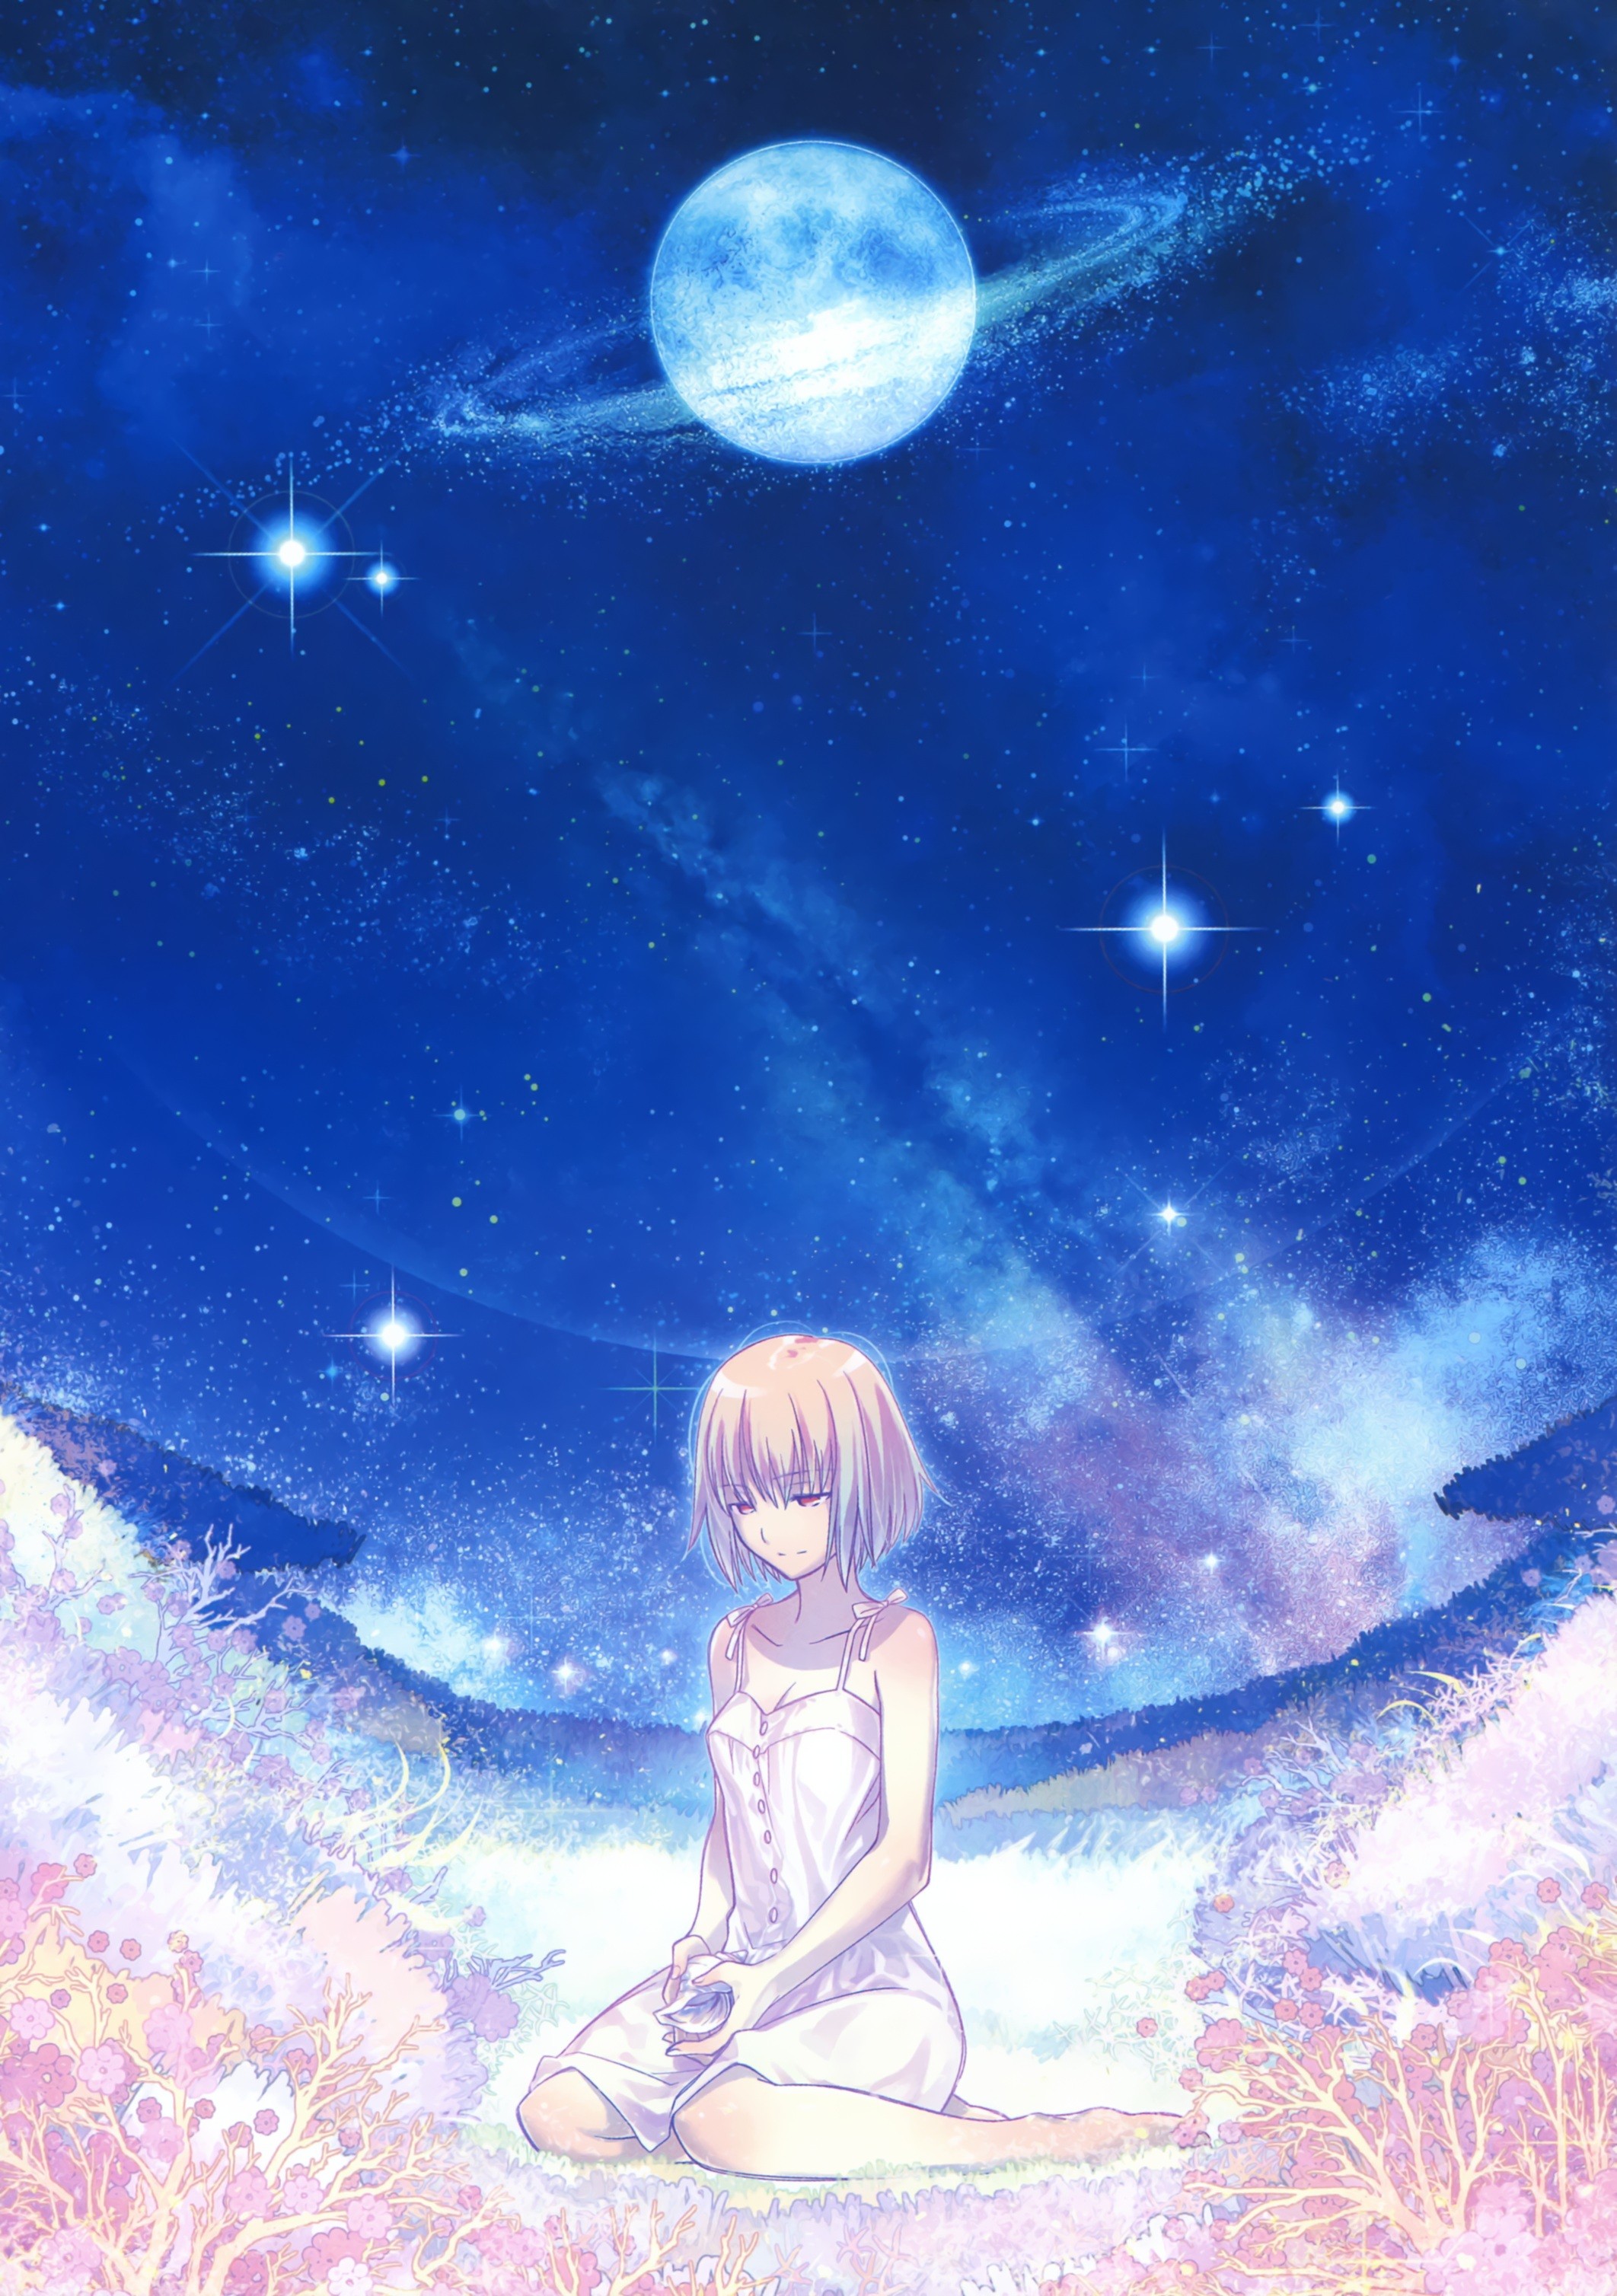 Anime Girl And The Moon Wallpapers - Wallpaper Cave